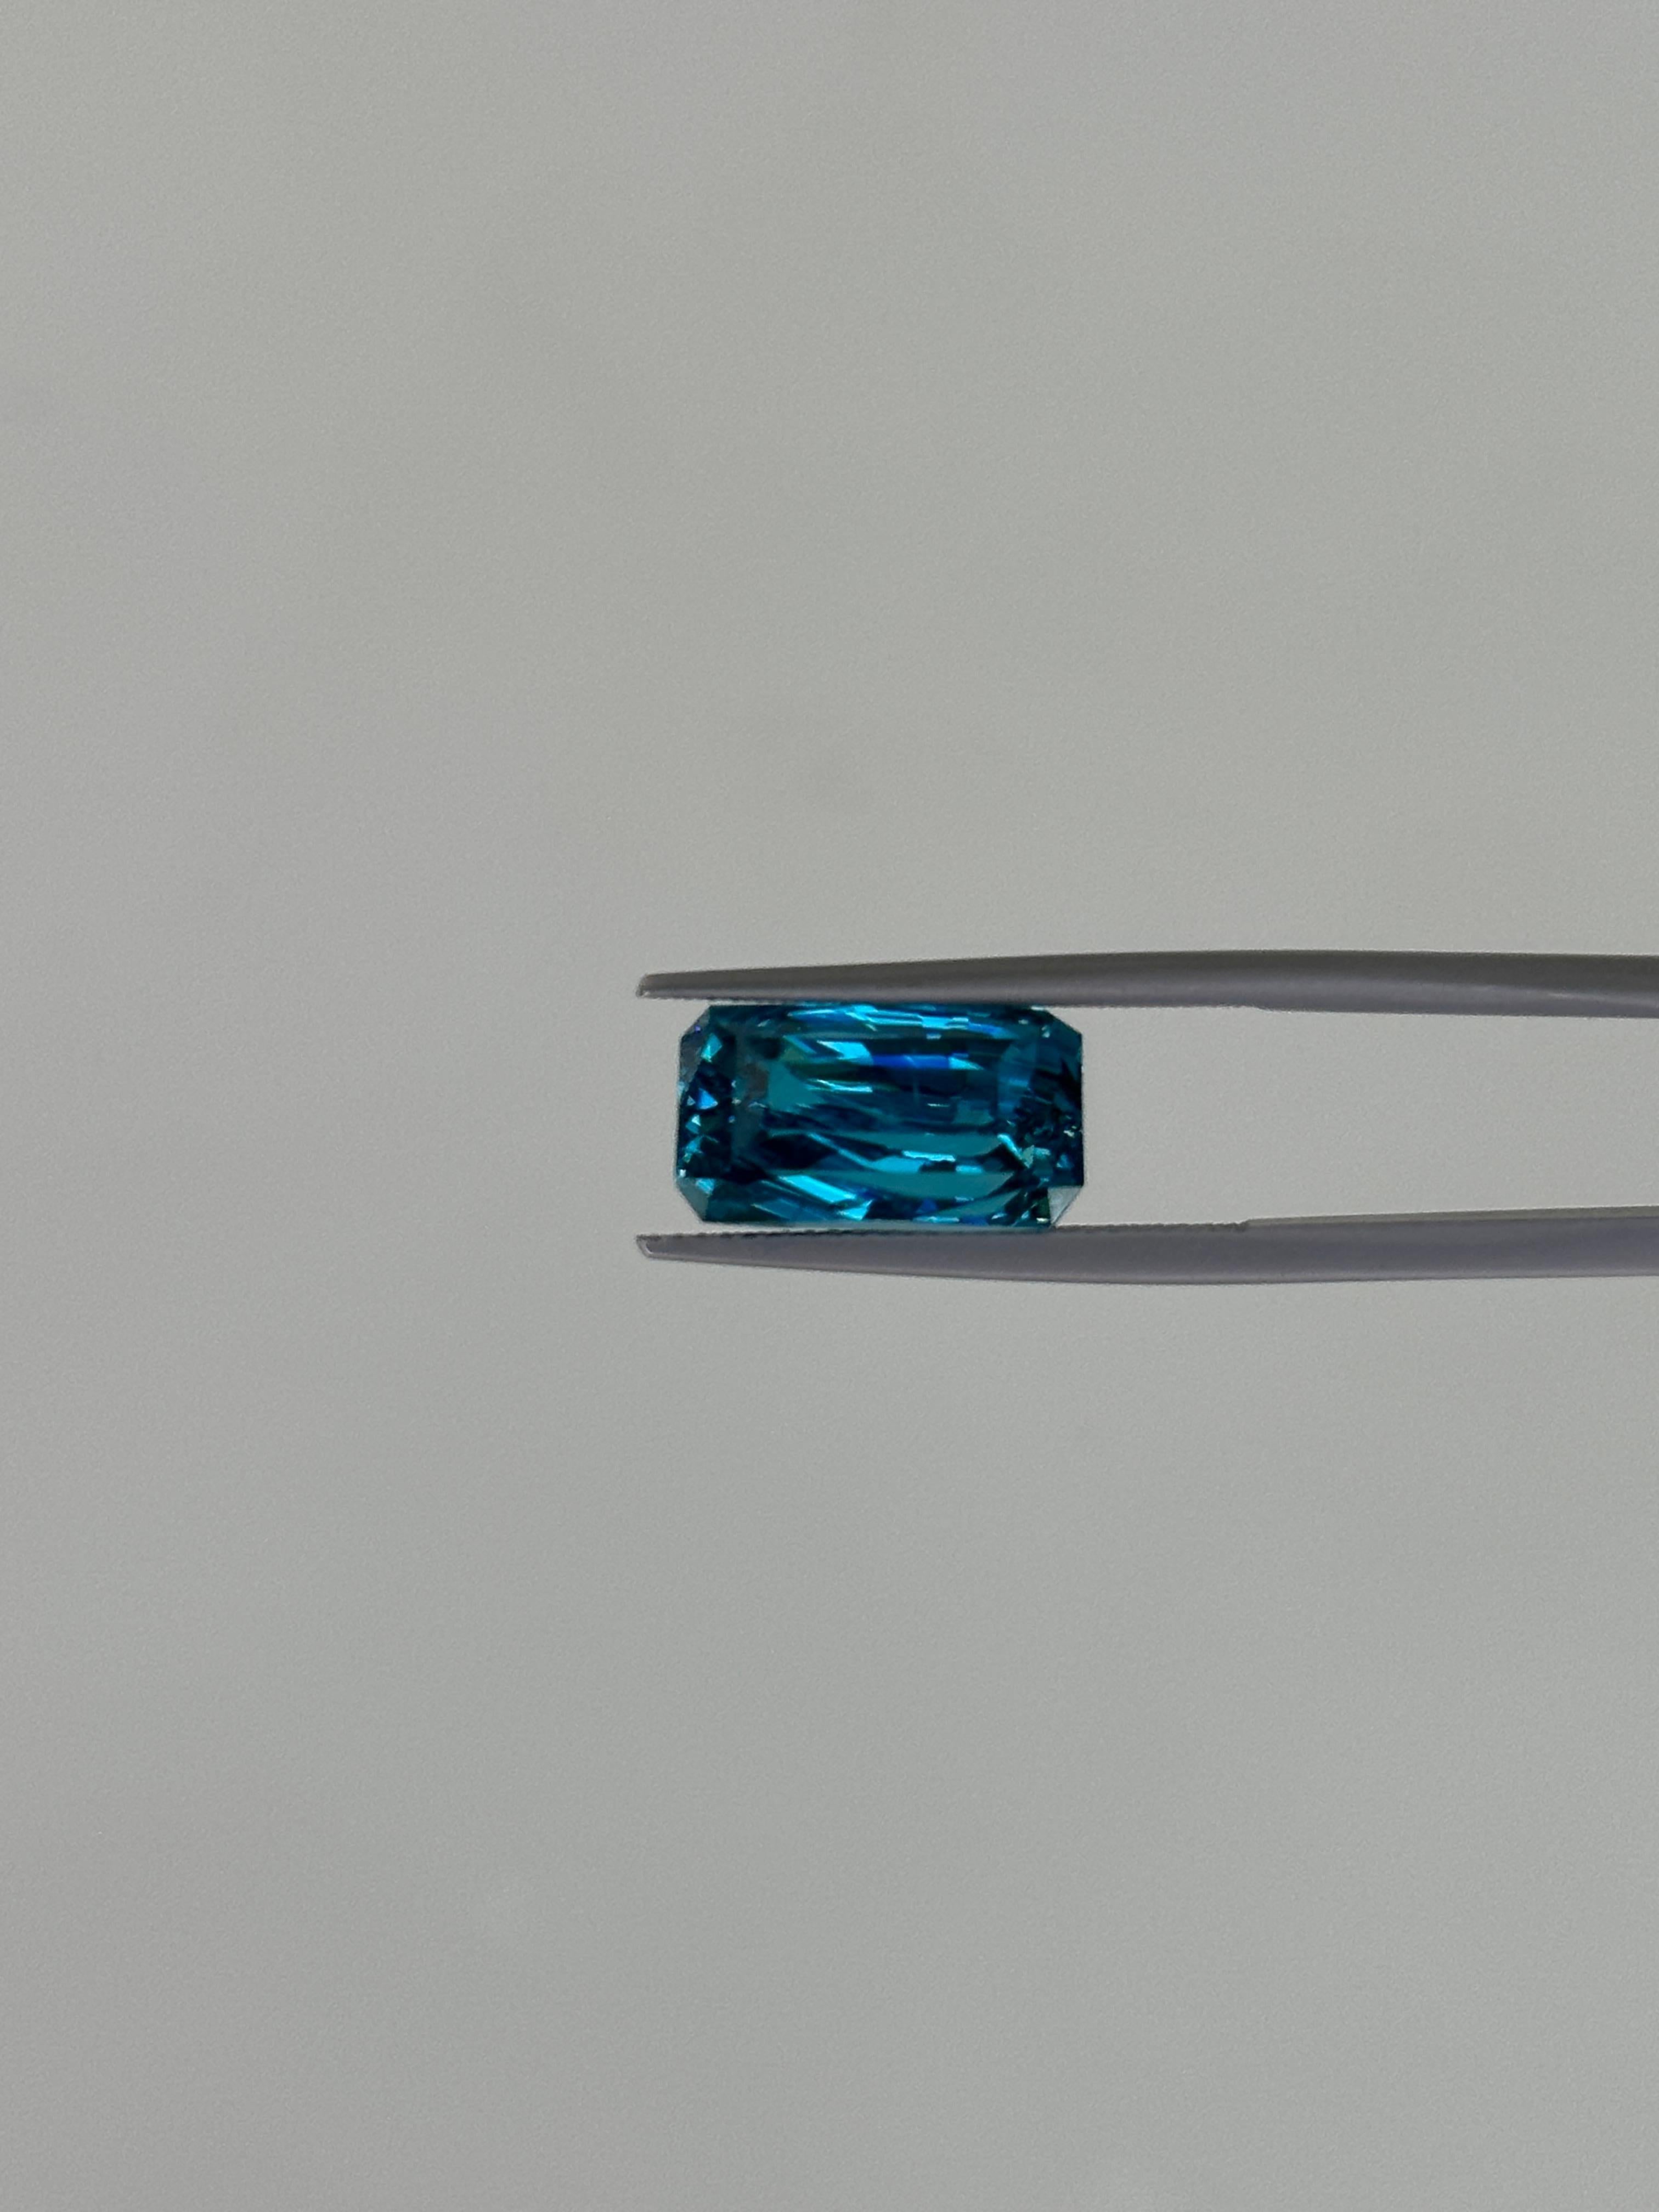 Absolutely Ravishing Octagon Ocean Blue Zircon
Rare sparkling Blue Zircon is only found at one place in the world at Ratanakiri province in Northeast Cambodia. Blue Zircon in this vivid blue color is very rare indeed. We cherry pick the stones at